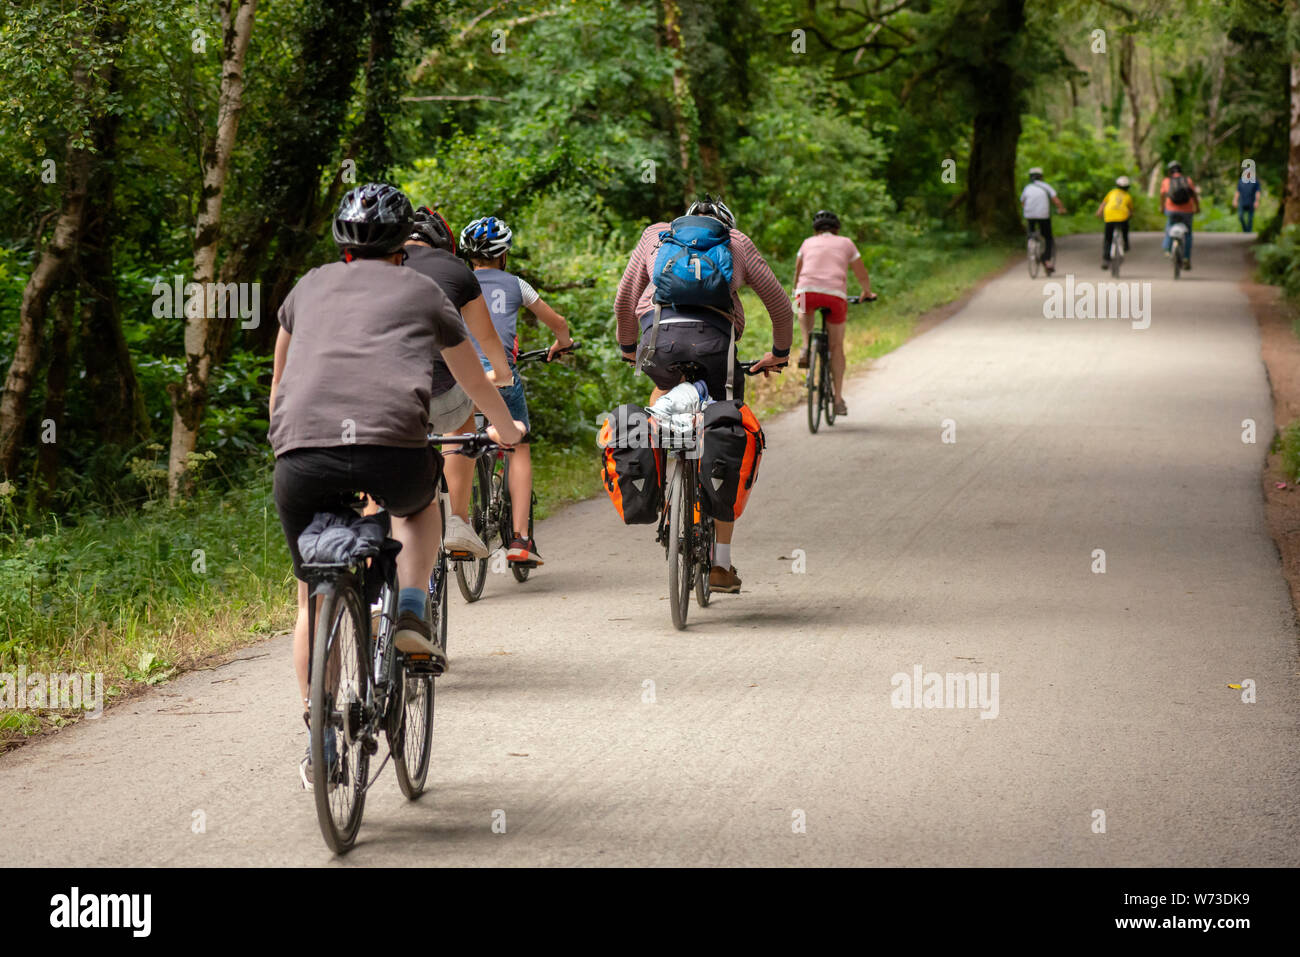 Cycling and eco tourism in Ireland. Group of tourists with bicycles cycling pedaling on park alley in Killarney National Park, County Kerry, Ireland. Stock Photo